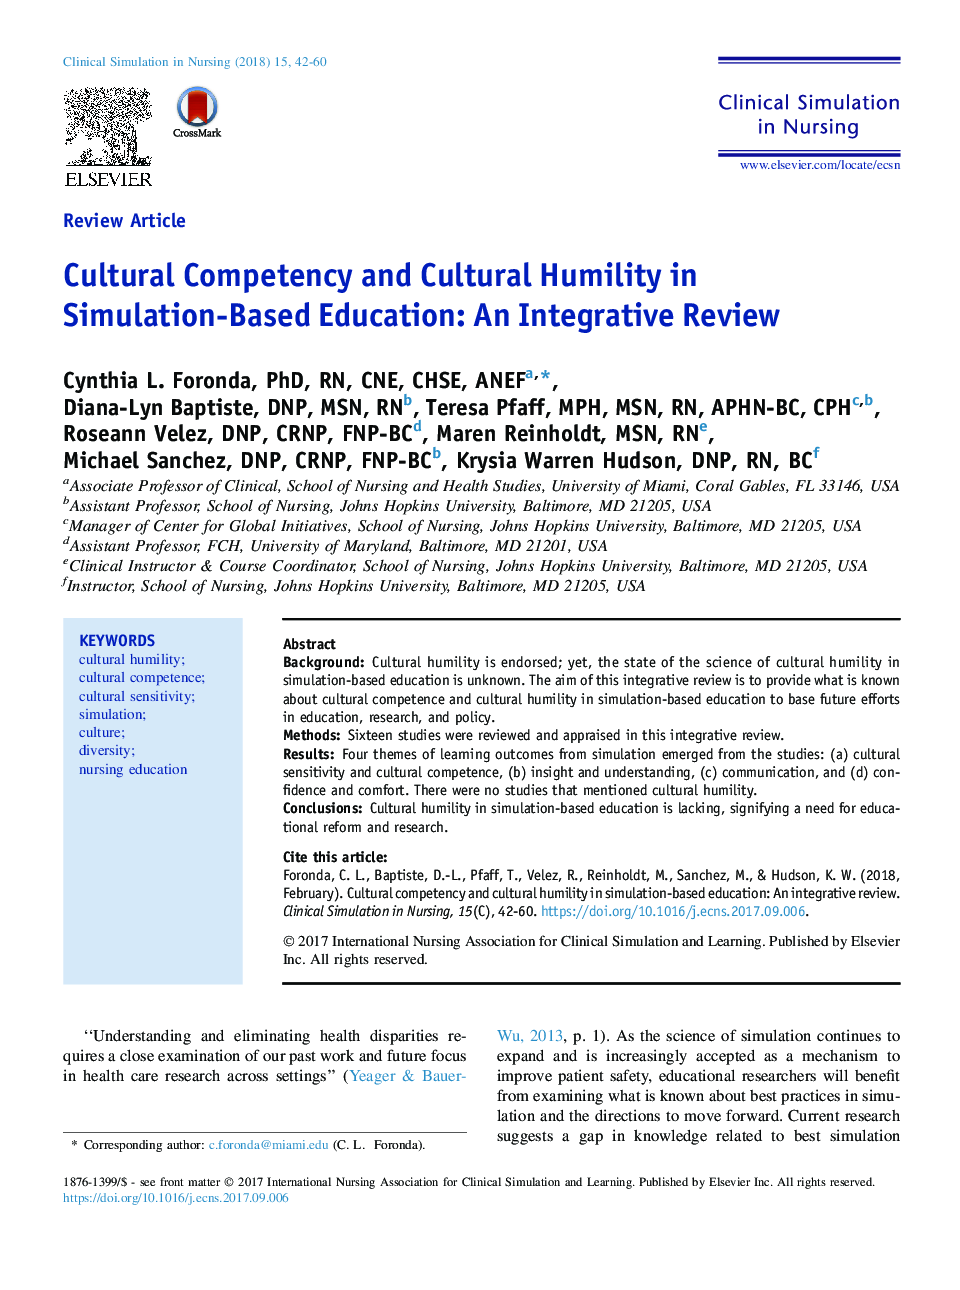 Cultural Competency and Cultural Humility in Simulation-Based Education: An Integrative Review